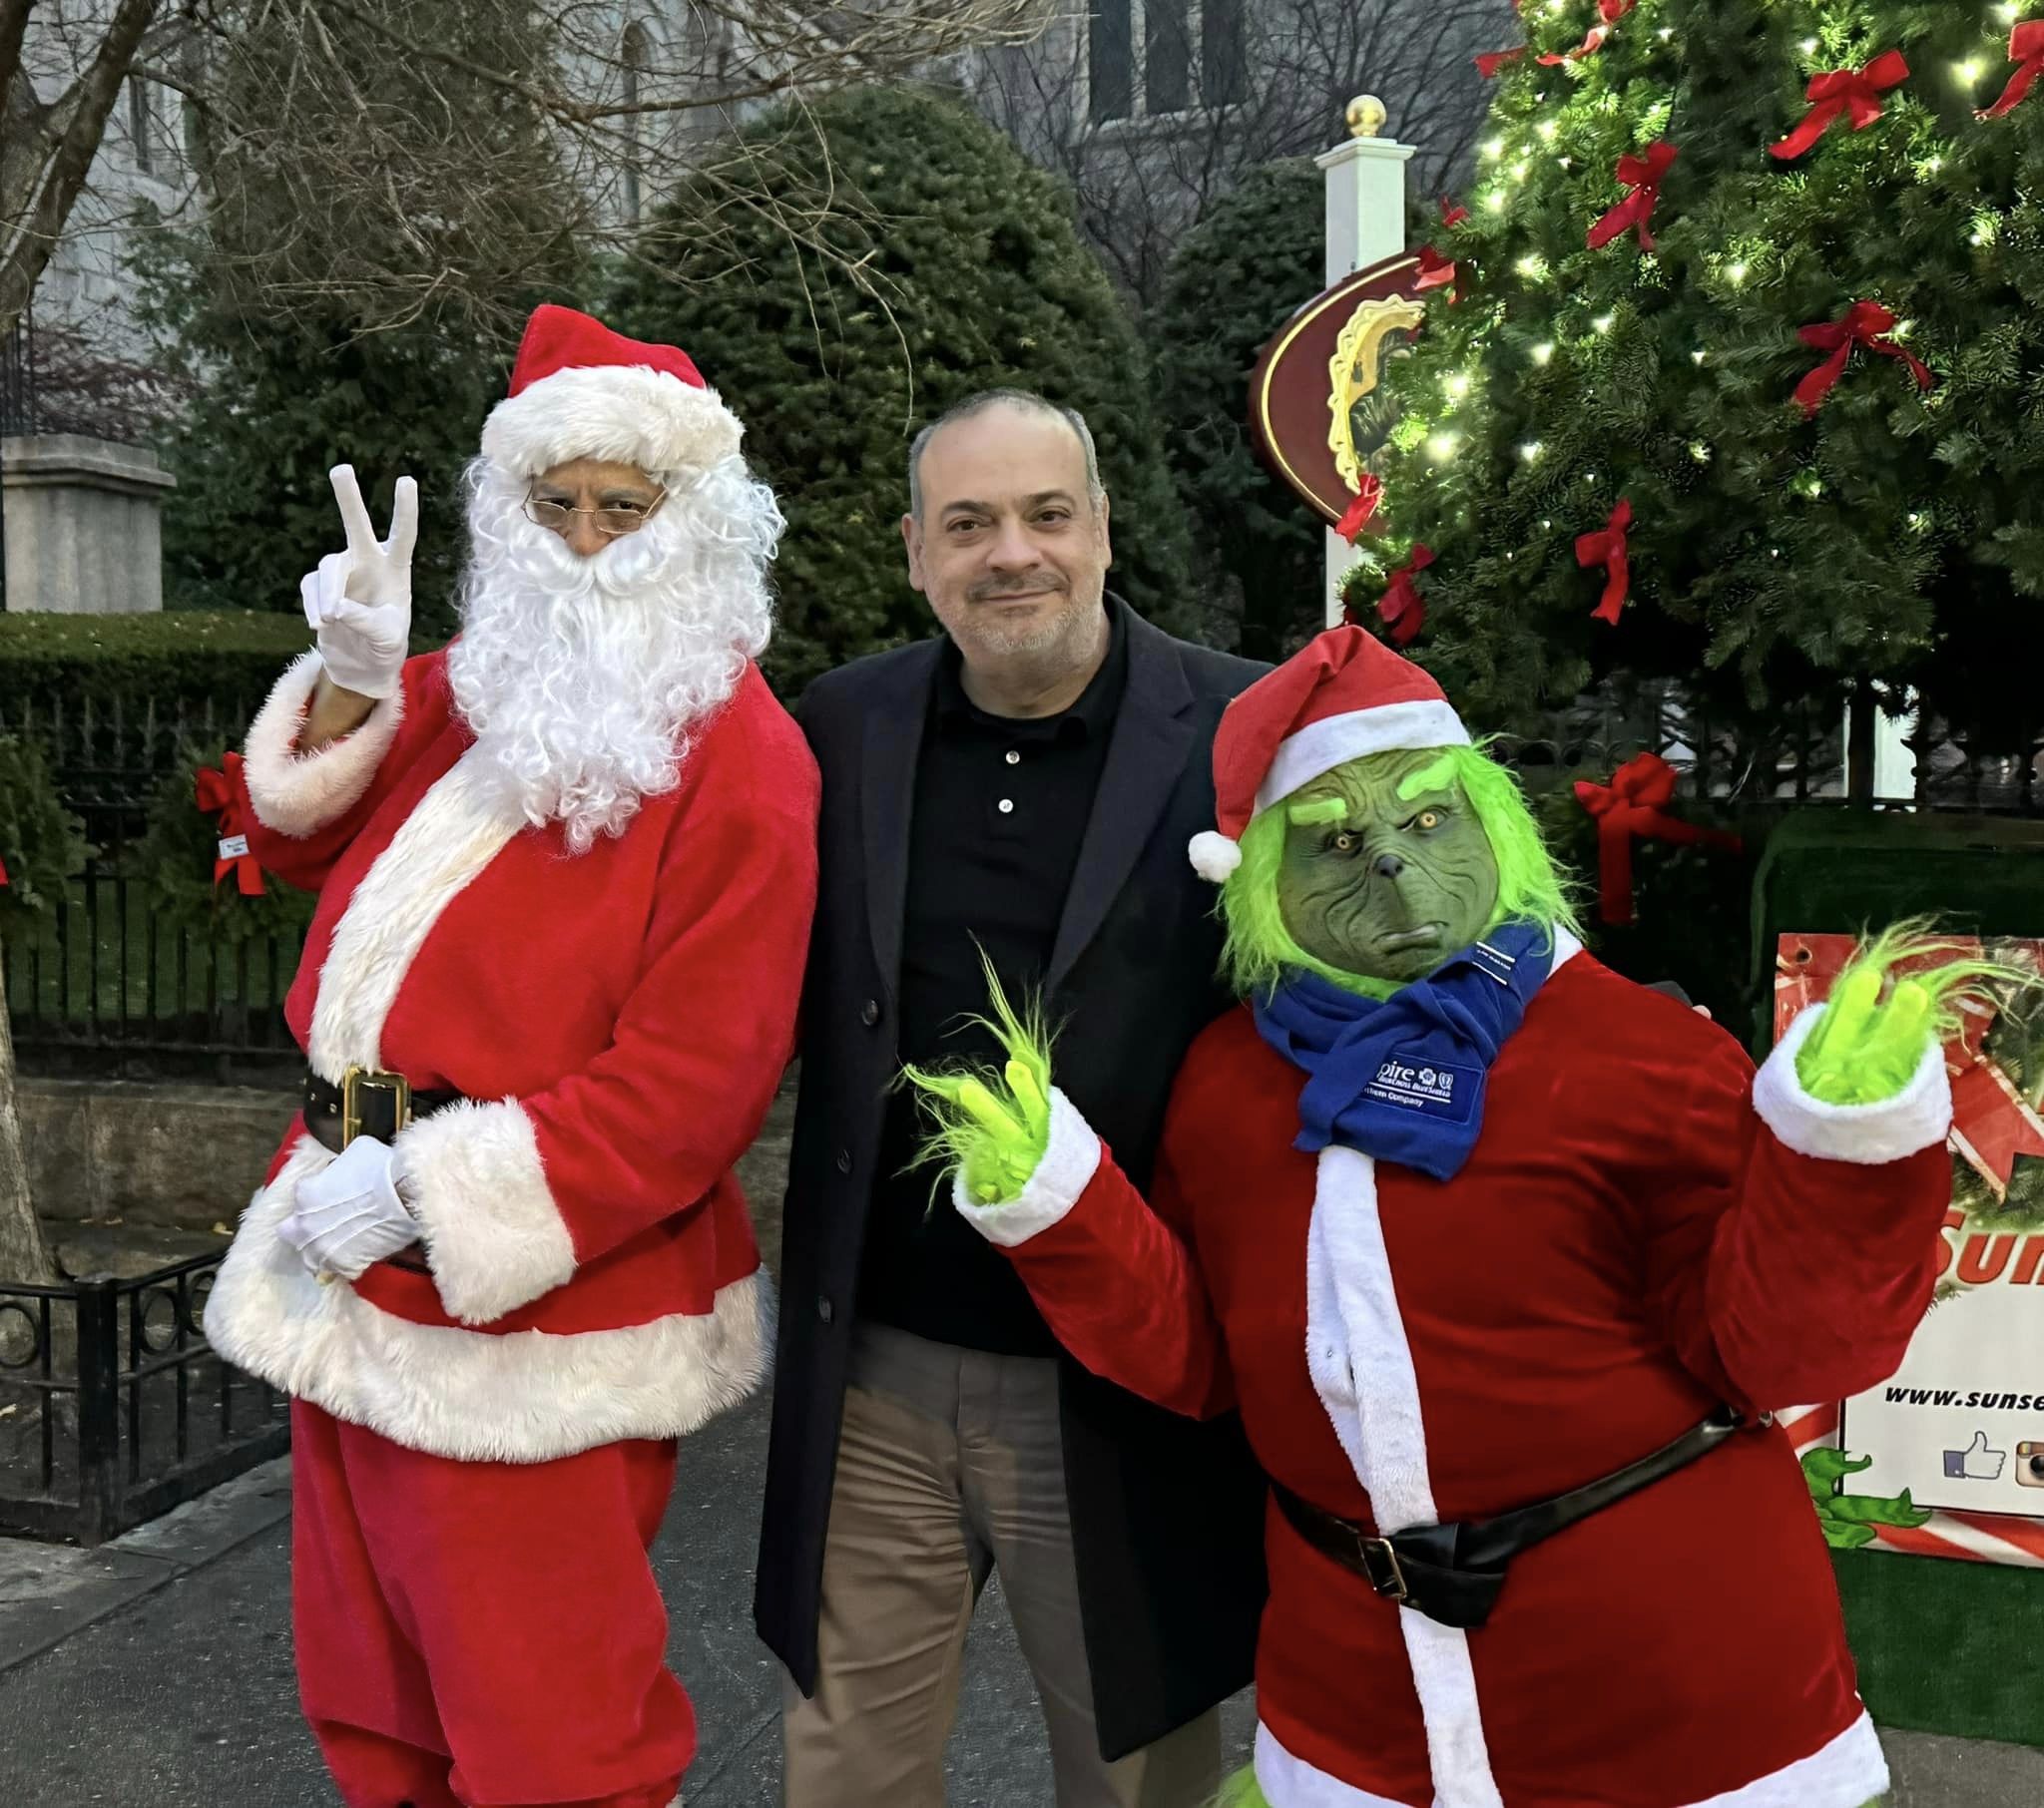 A man in a black jacket stands smiling between someone dressed as santa claus and another person costumed as the grinch, in front of a christmas tree.